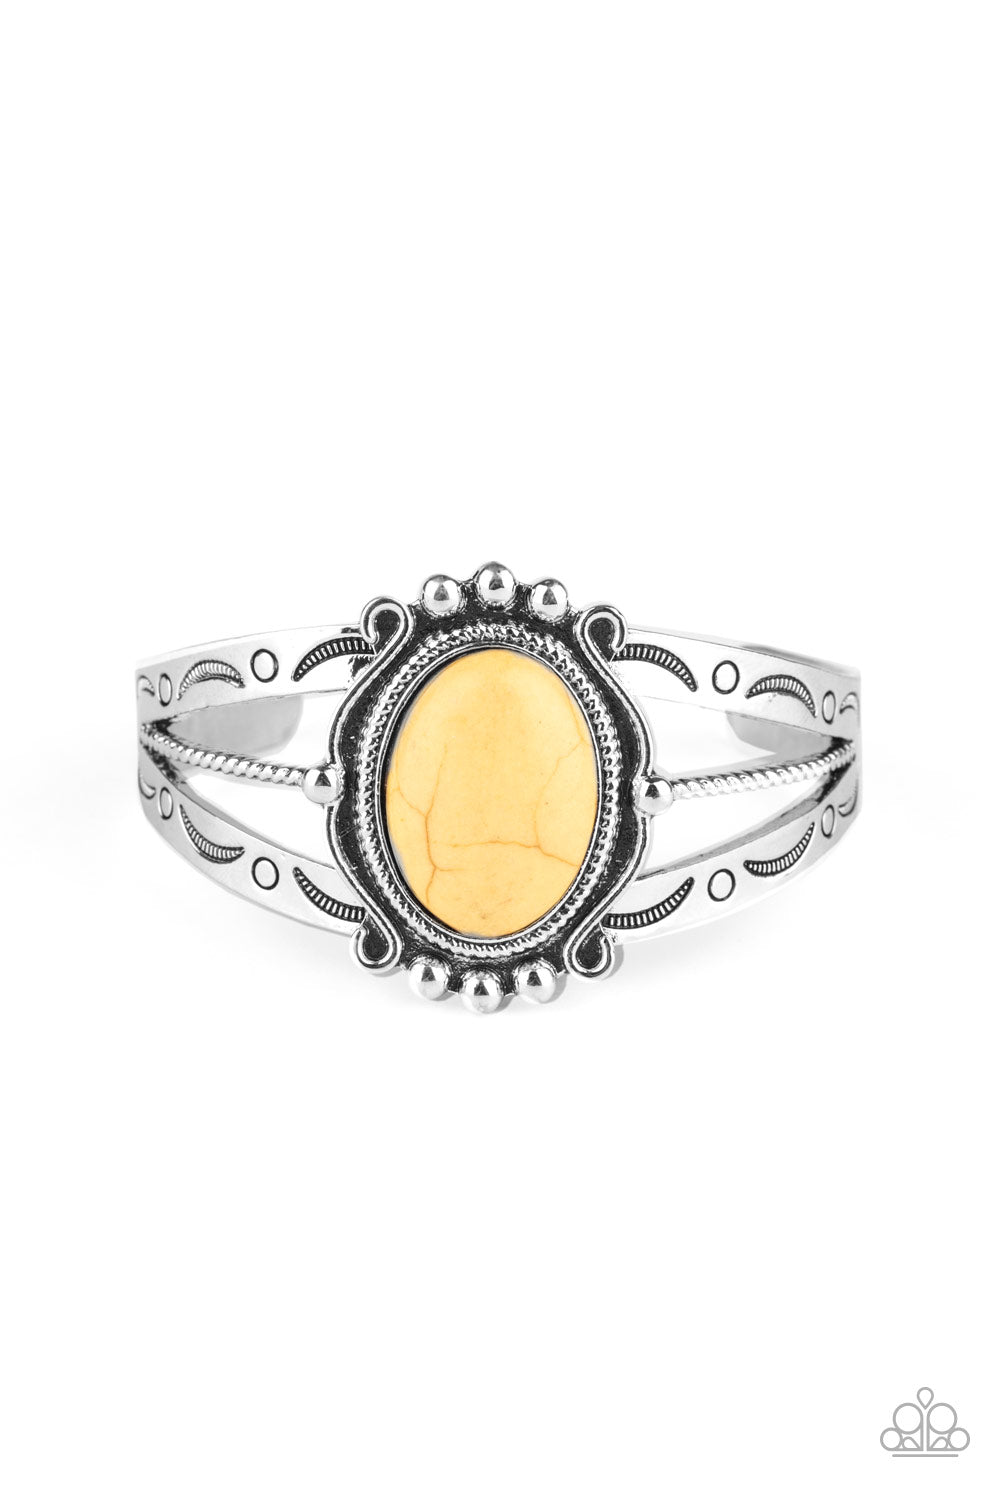 A twisted silver bar is flanked by two silver bands stamped in artisan inspired patterns, coalescing into an airy cuff. Pressed into the center of a decorative silver frame, a sunny yellow stone sits atop the stacked cuff for an earthy finish.